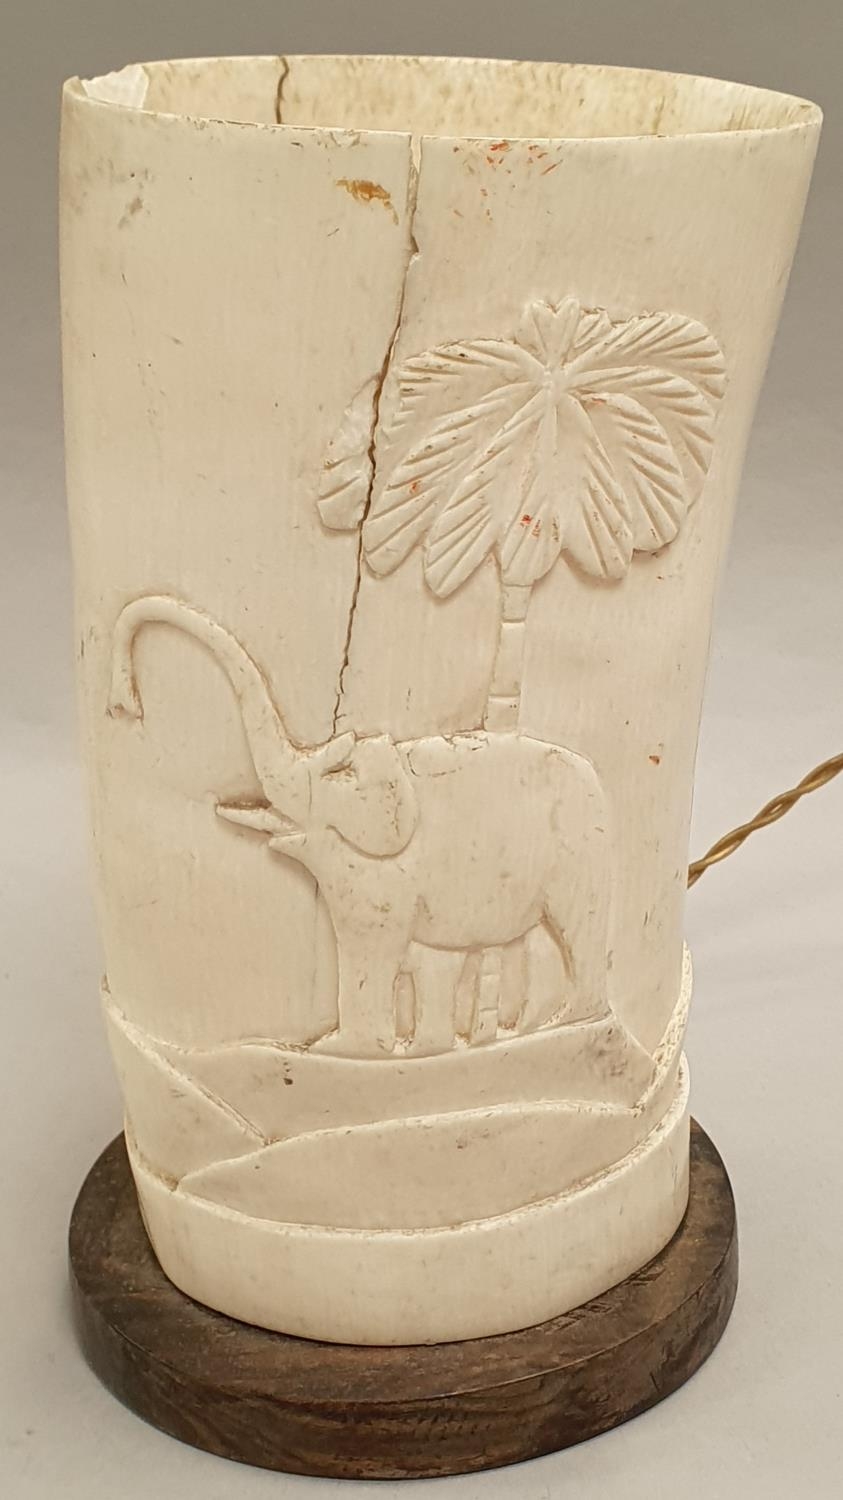 Vintage table lamp with ivory shade depicting elephants 20cm tall.